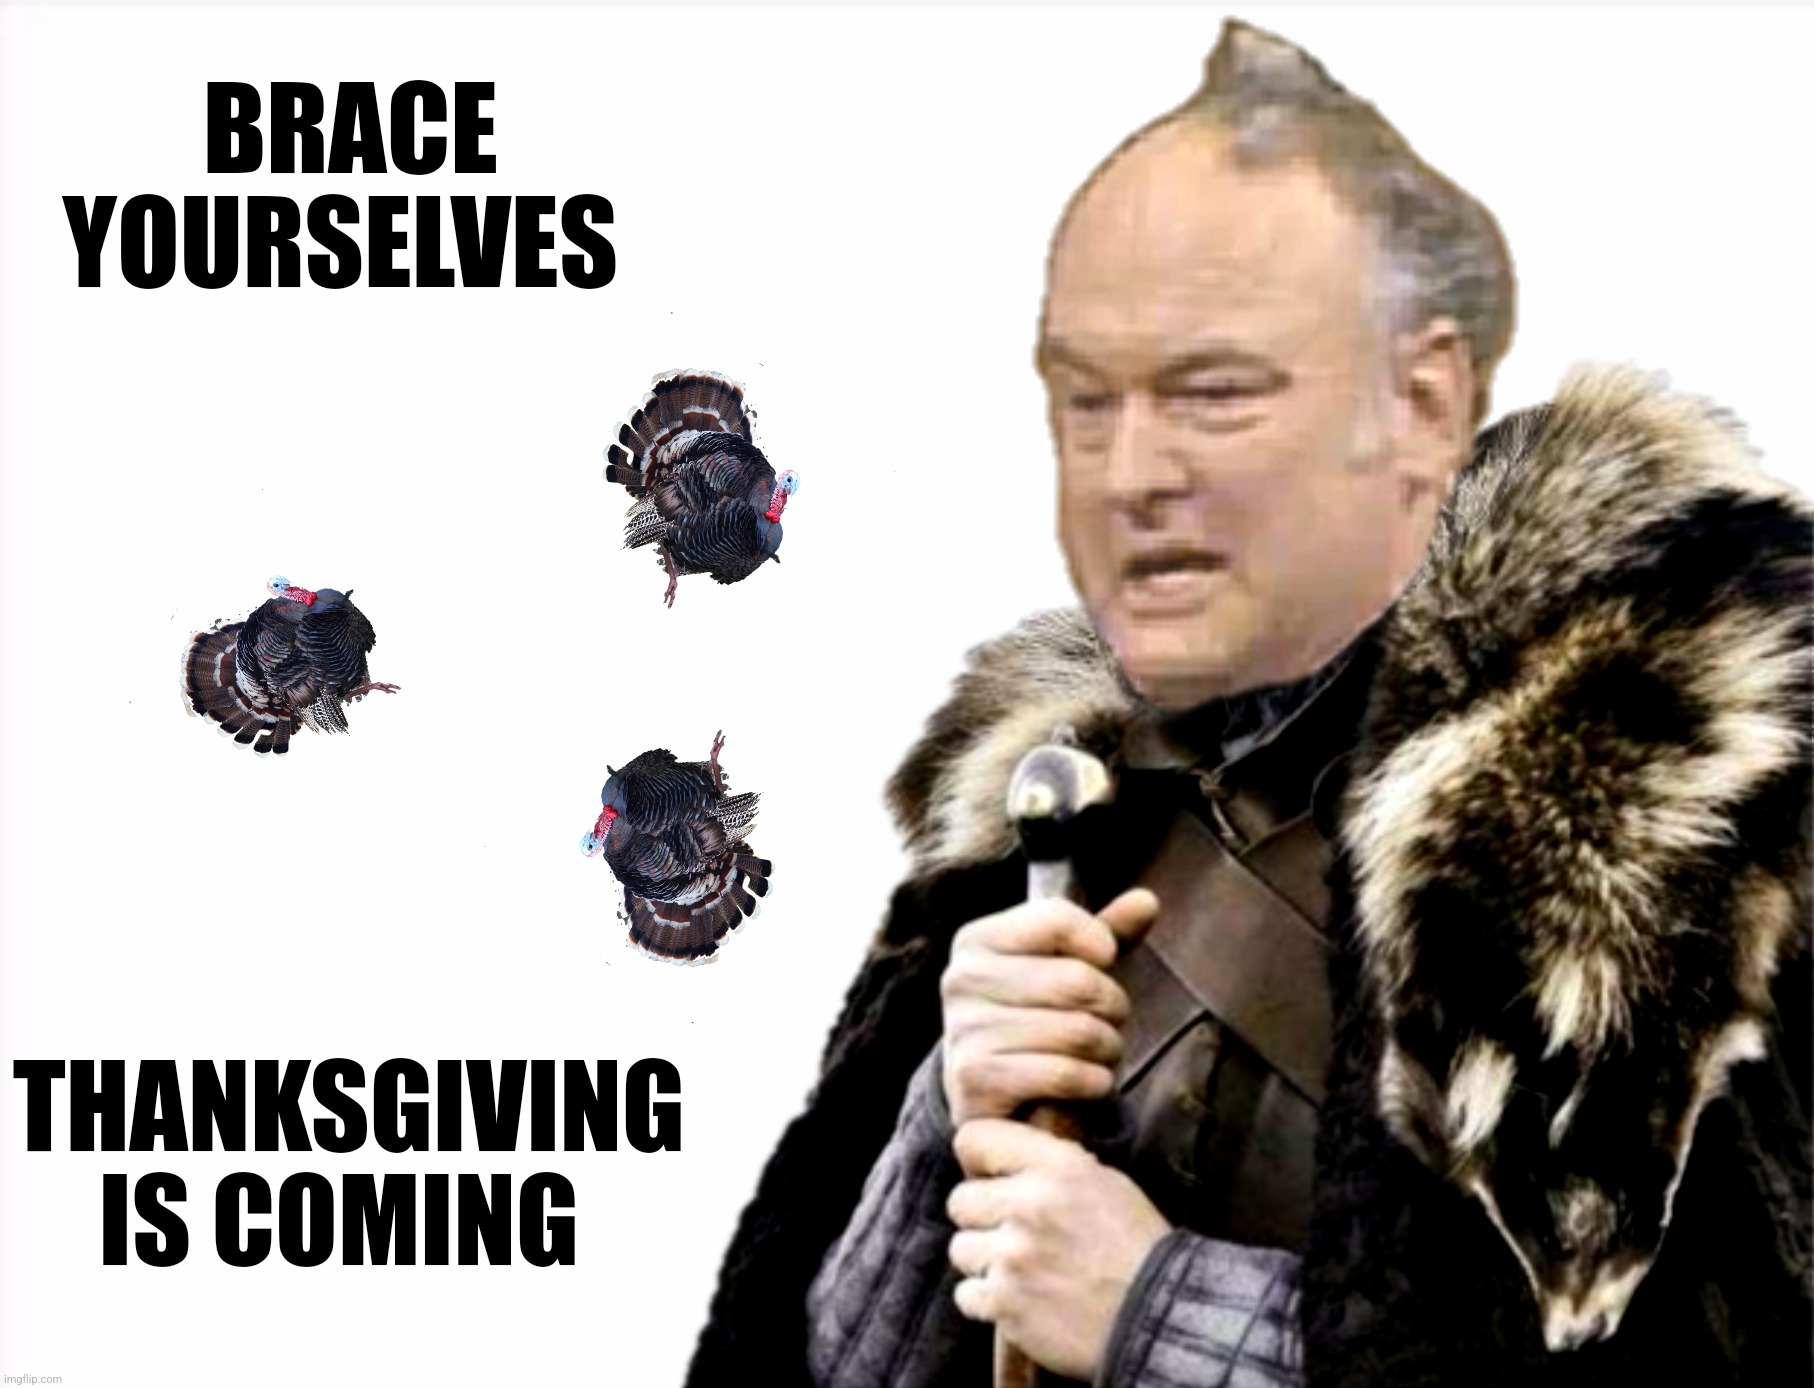 Bad Photoshop Sunday presents:  "As God is my witness I thought turkeys could fly" | BRACE YOURSELVES; THANKSGIVING IS COMING | image tagged in bad photoshop sunday,brace yourselves x is coming,wkrp in cincinnati,arthur carlson,thanksgiving | made w/ Imgflip meme maker